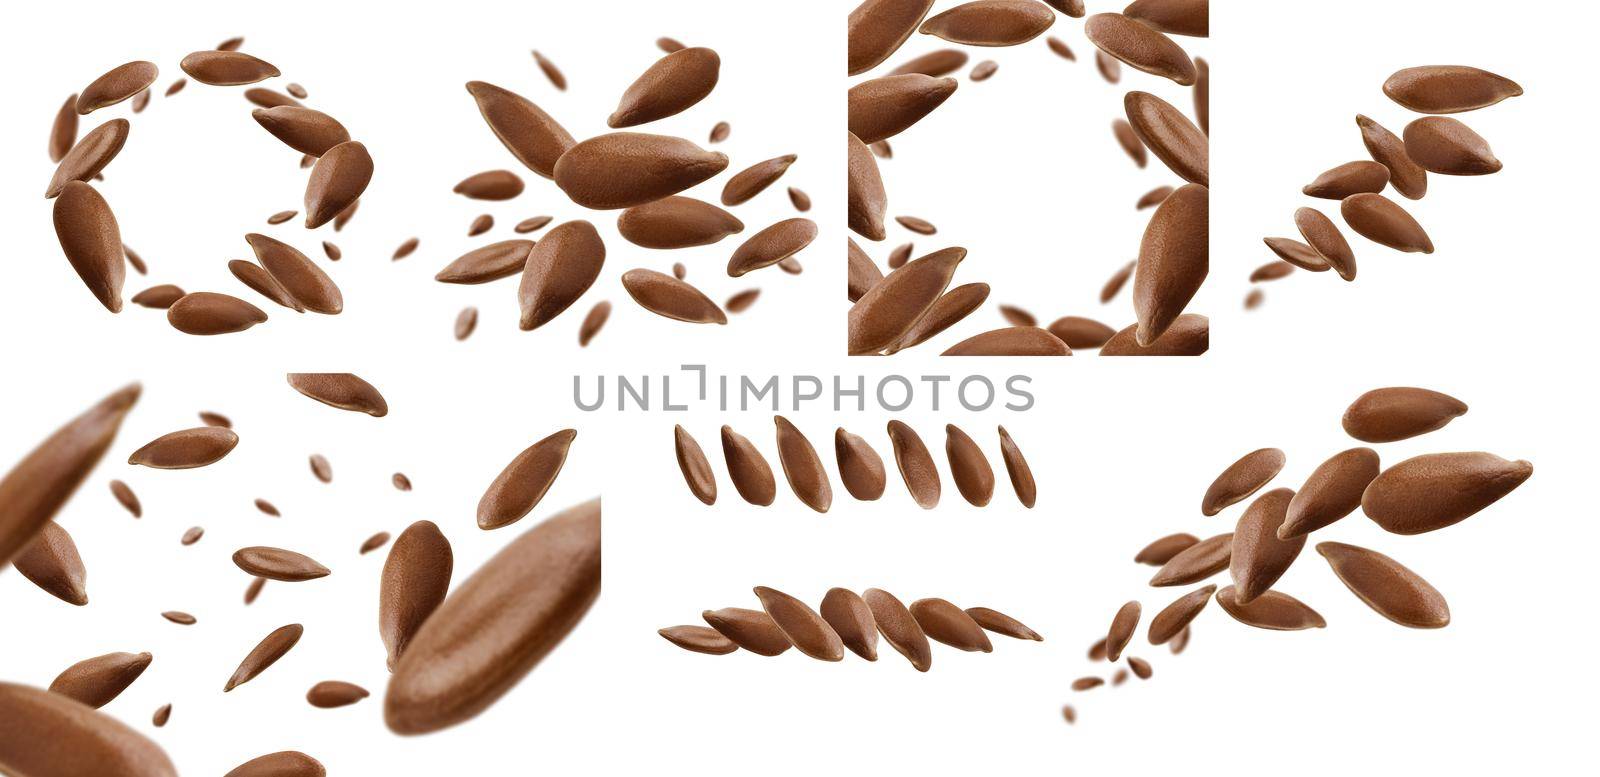 A set of photos. Flax seeds are levitated on a white background.